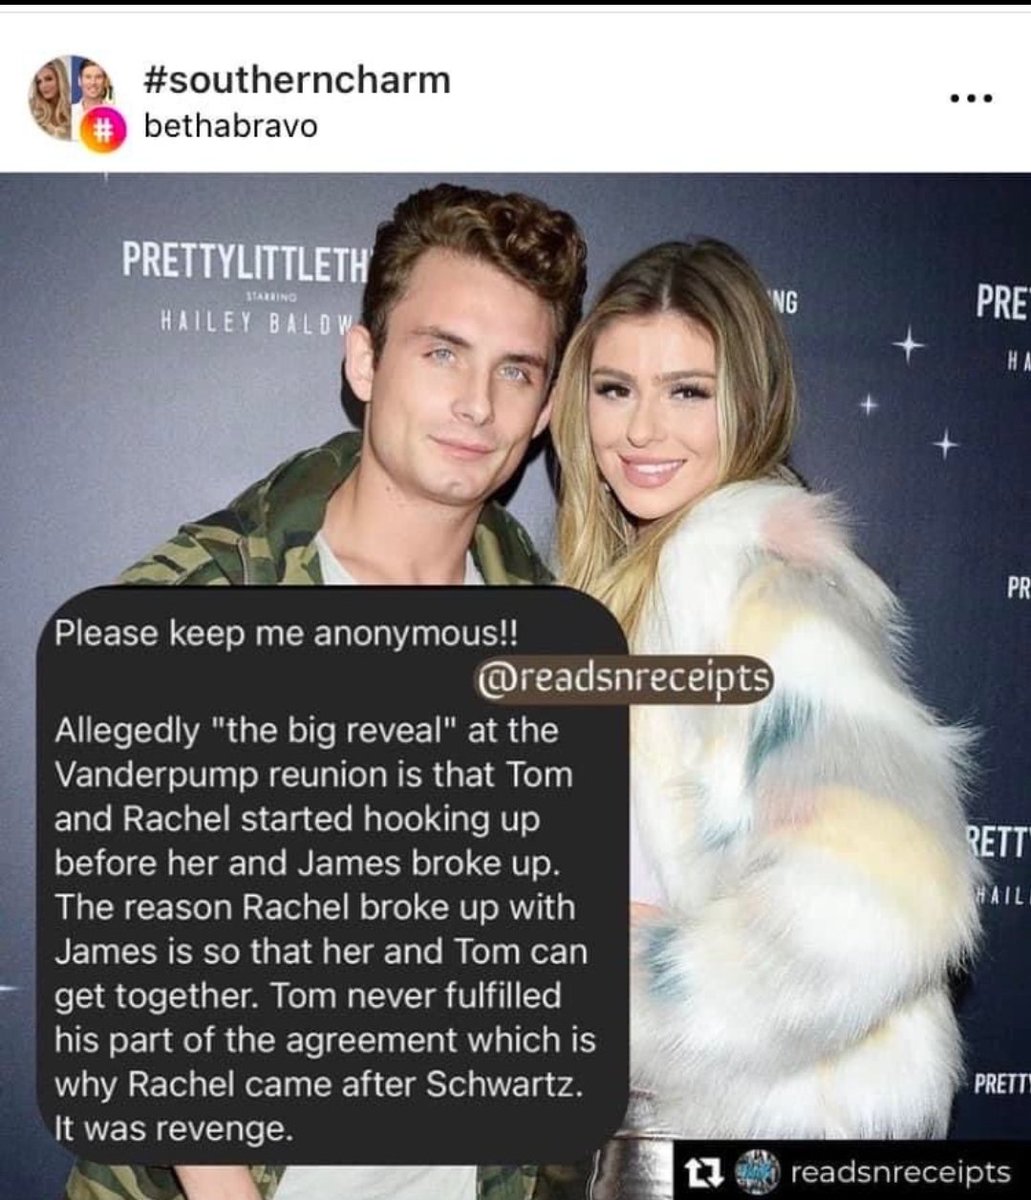 This seems like it really could be the big reveal....thoughts??  #PumpRules
#pumprulesreunion #VPR #BigReveal
#Scandoval